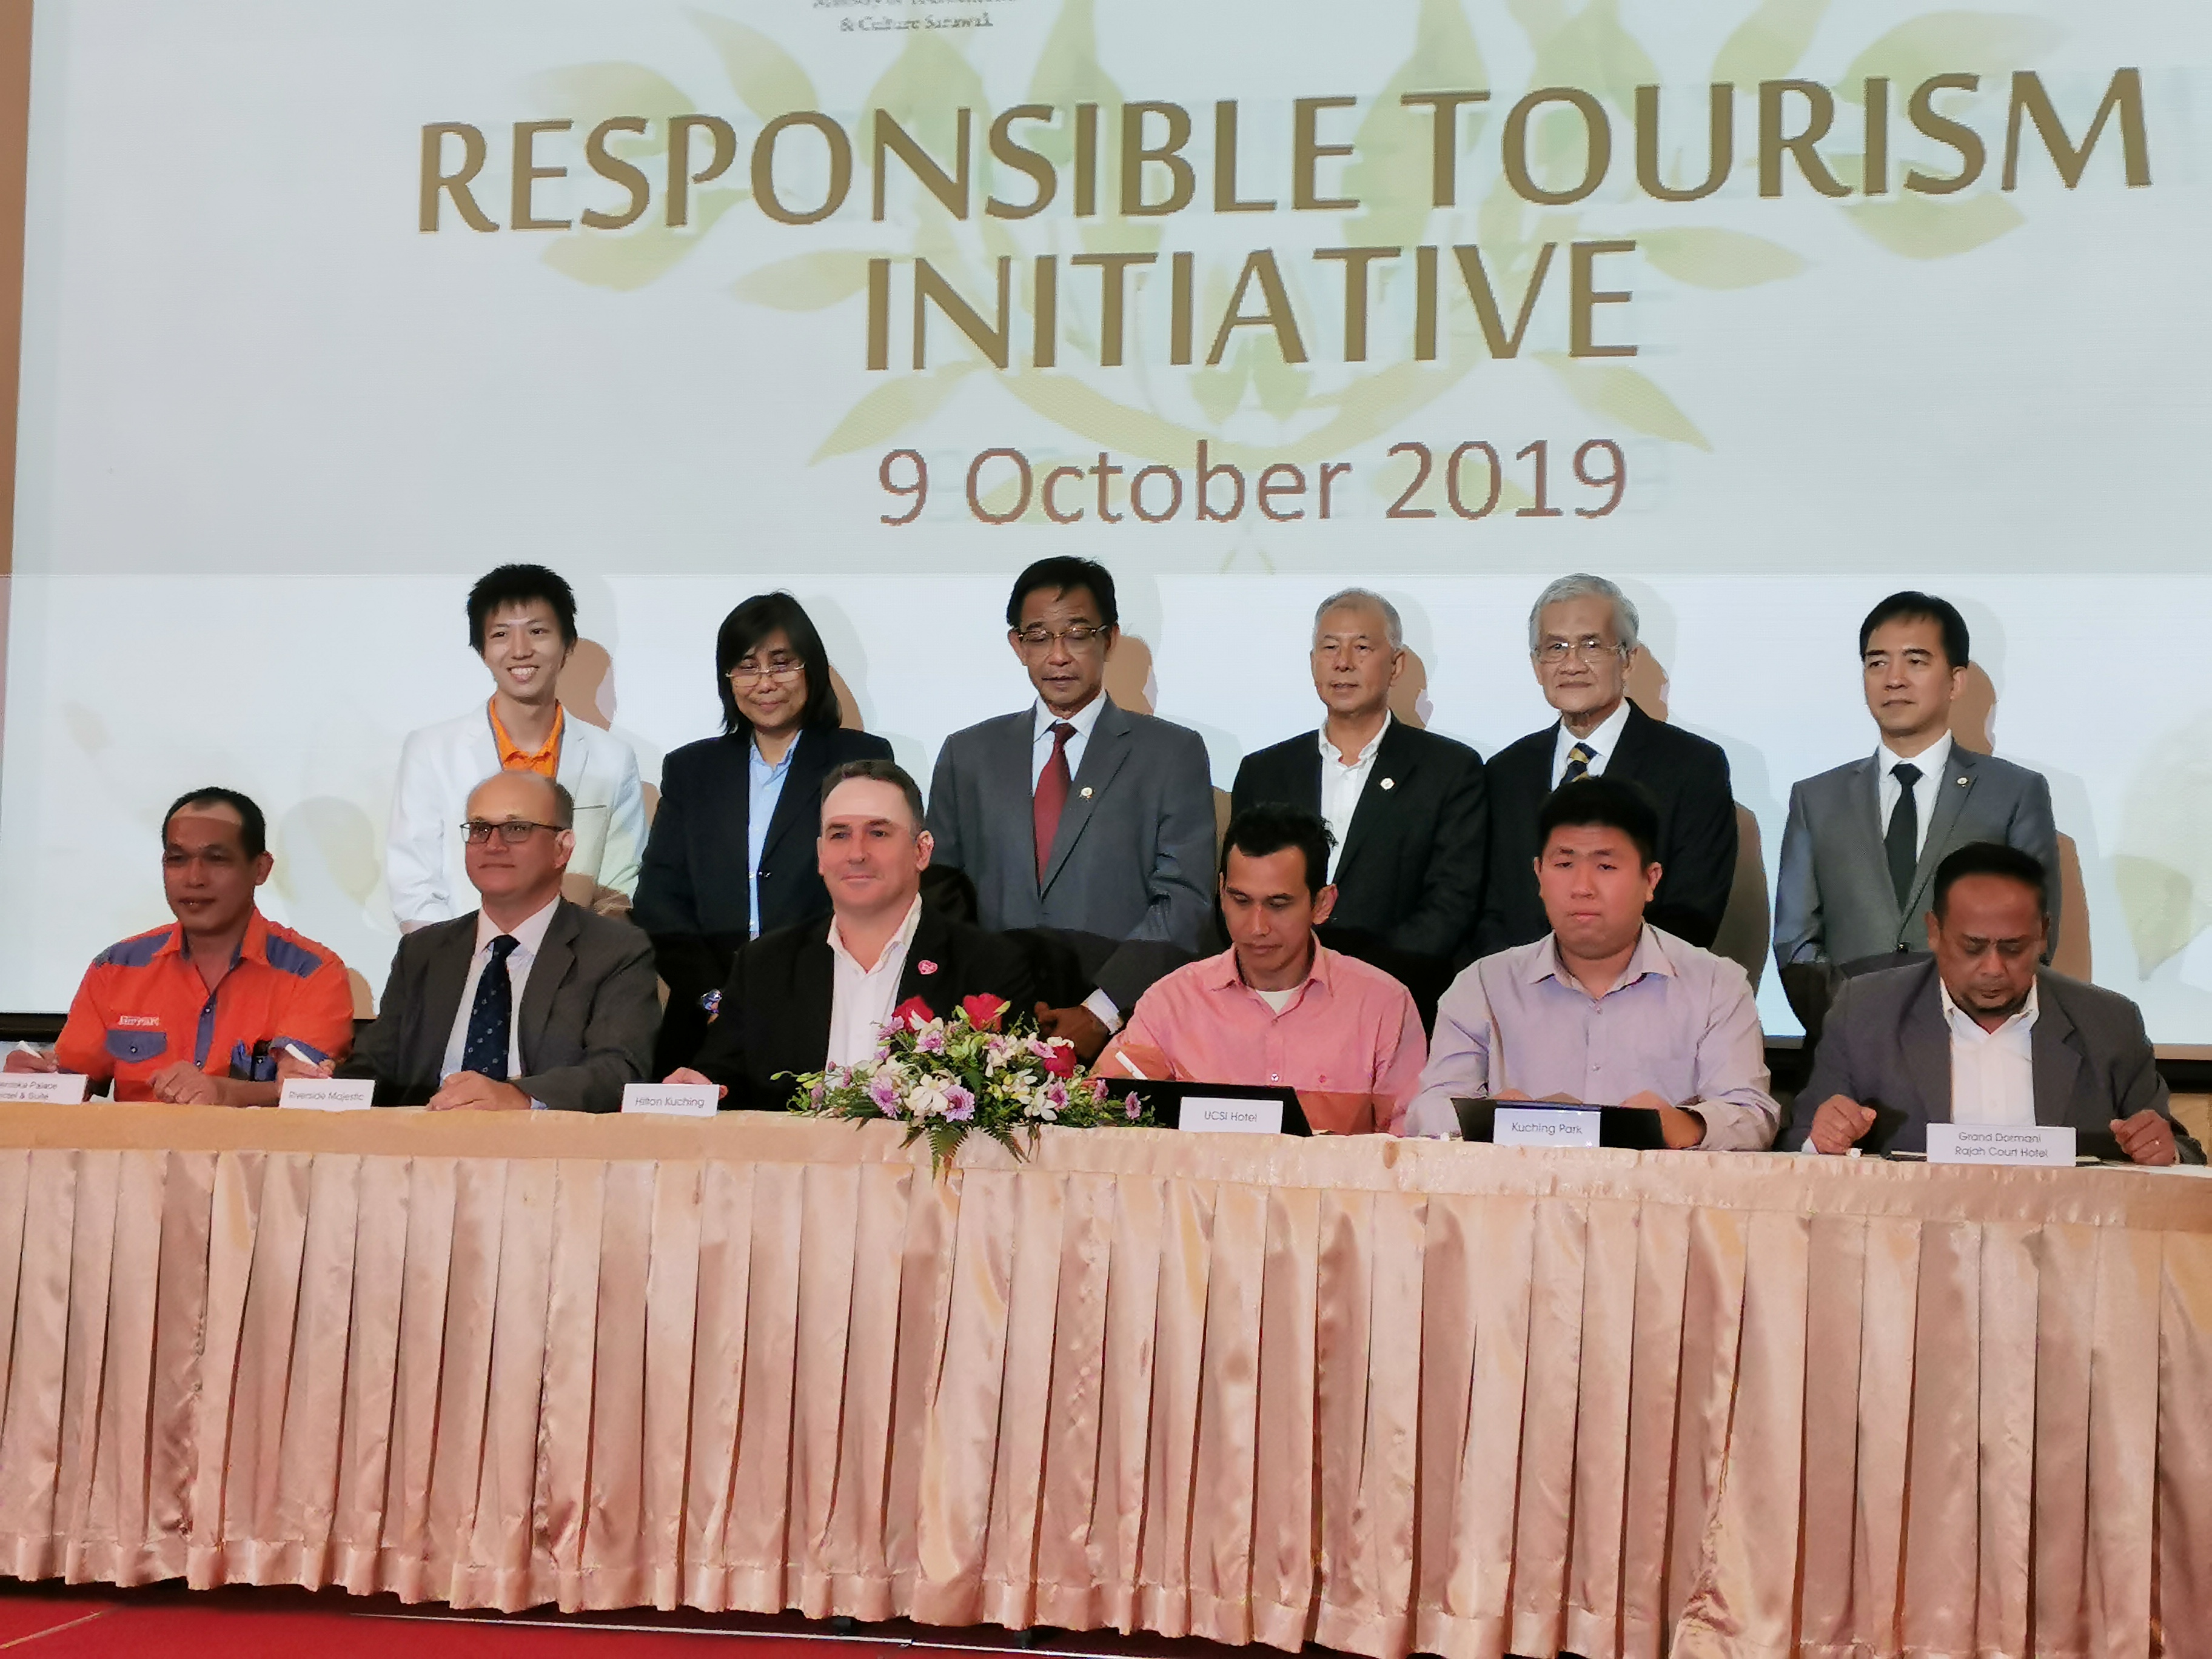 Photo shows six hotel partners participating in the pledge signing ceremony, witnessed by the Minister of Tourism, Arts and Culture, YB Datuk Haji Abdul Karim Rahman Hamzah standing third from left.